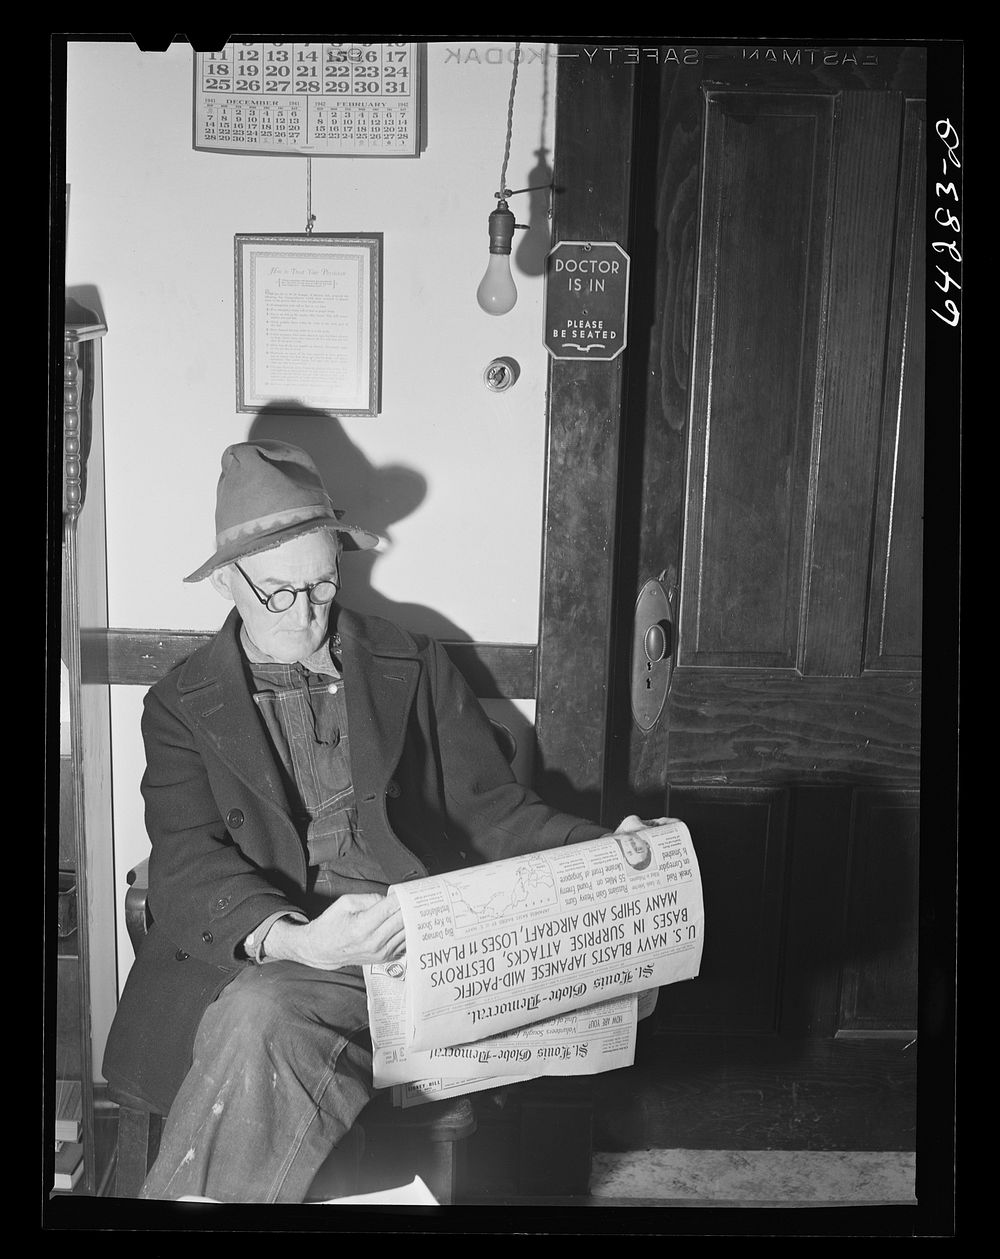 Farmer waiting to see the doctor. Oran, Missouri. Sourced from the Library of Congress.